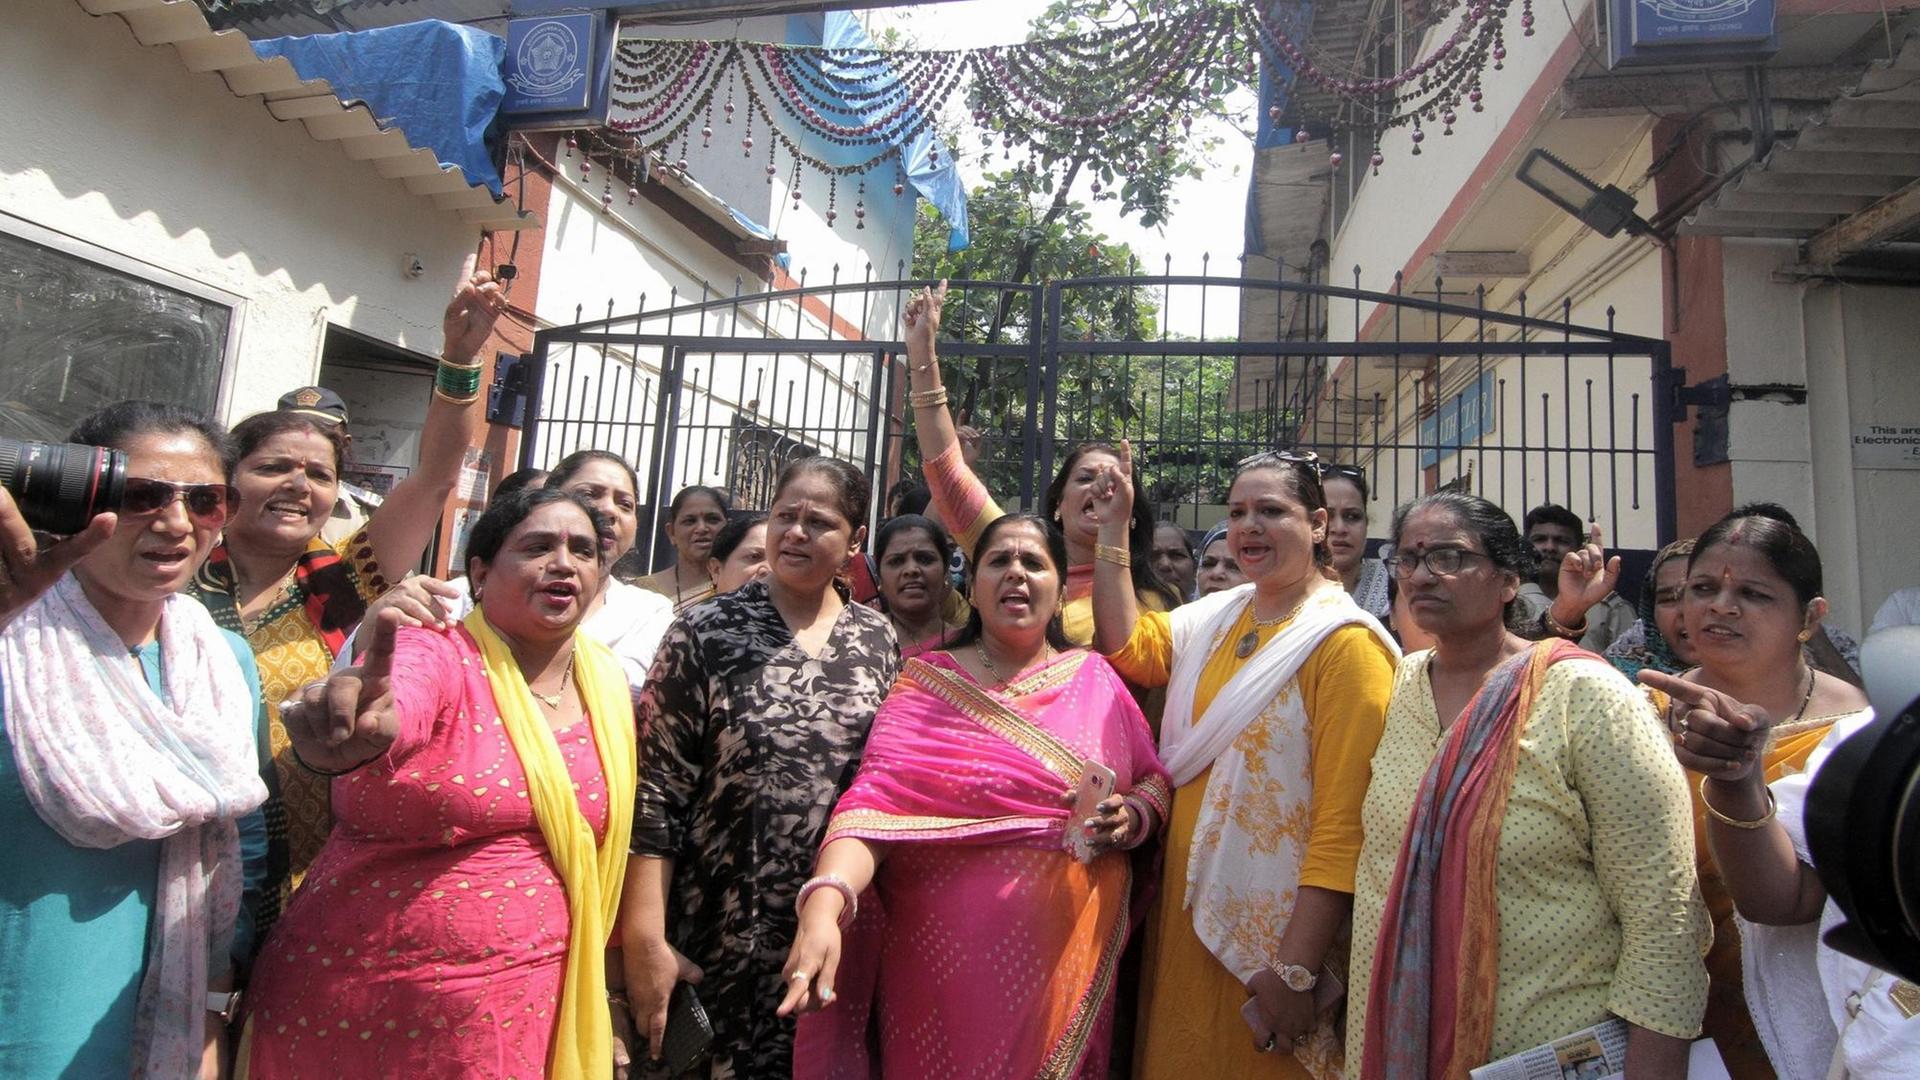 All India Mahila Congress shout slogans against Bollywood actor Nana Patekar outside a police station as they demand justice for Bollywood actress Tanushree Dutta on October 11, 2018. Tanushree Dutta former actor alleges that senior actor Nana Patekar grabbed her arm and pushed her on the pretext of teaching her dance moves and touched her "indecently and unnecessarily" in front of everybody on the sets of 2008 film 'Horn OK Pleasss'. The 34-year-old alleges that when she complained to the director, producer and choreographer of the film about Nana Patekar's behavior, they reassured her but later tried to force her to perform an intimate dance step with Nana Patekar. (Photo by Prash Waydande/NurPhoto) | Keine Weitergabe an Wiederverkäufer.